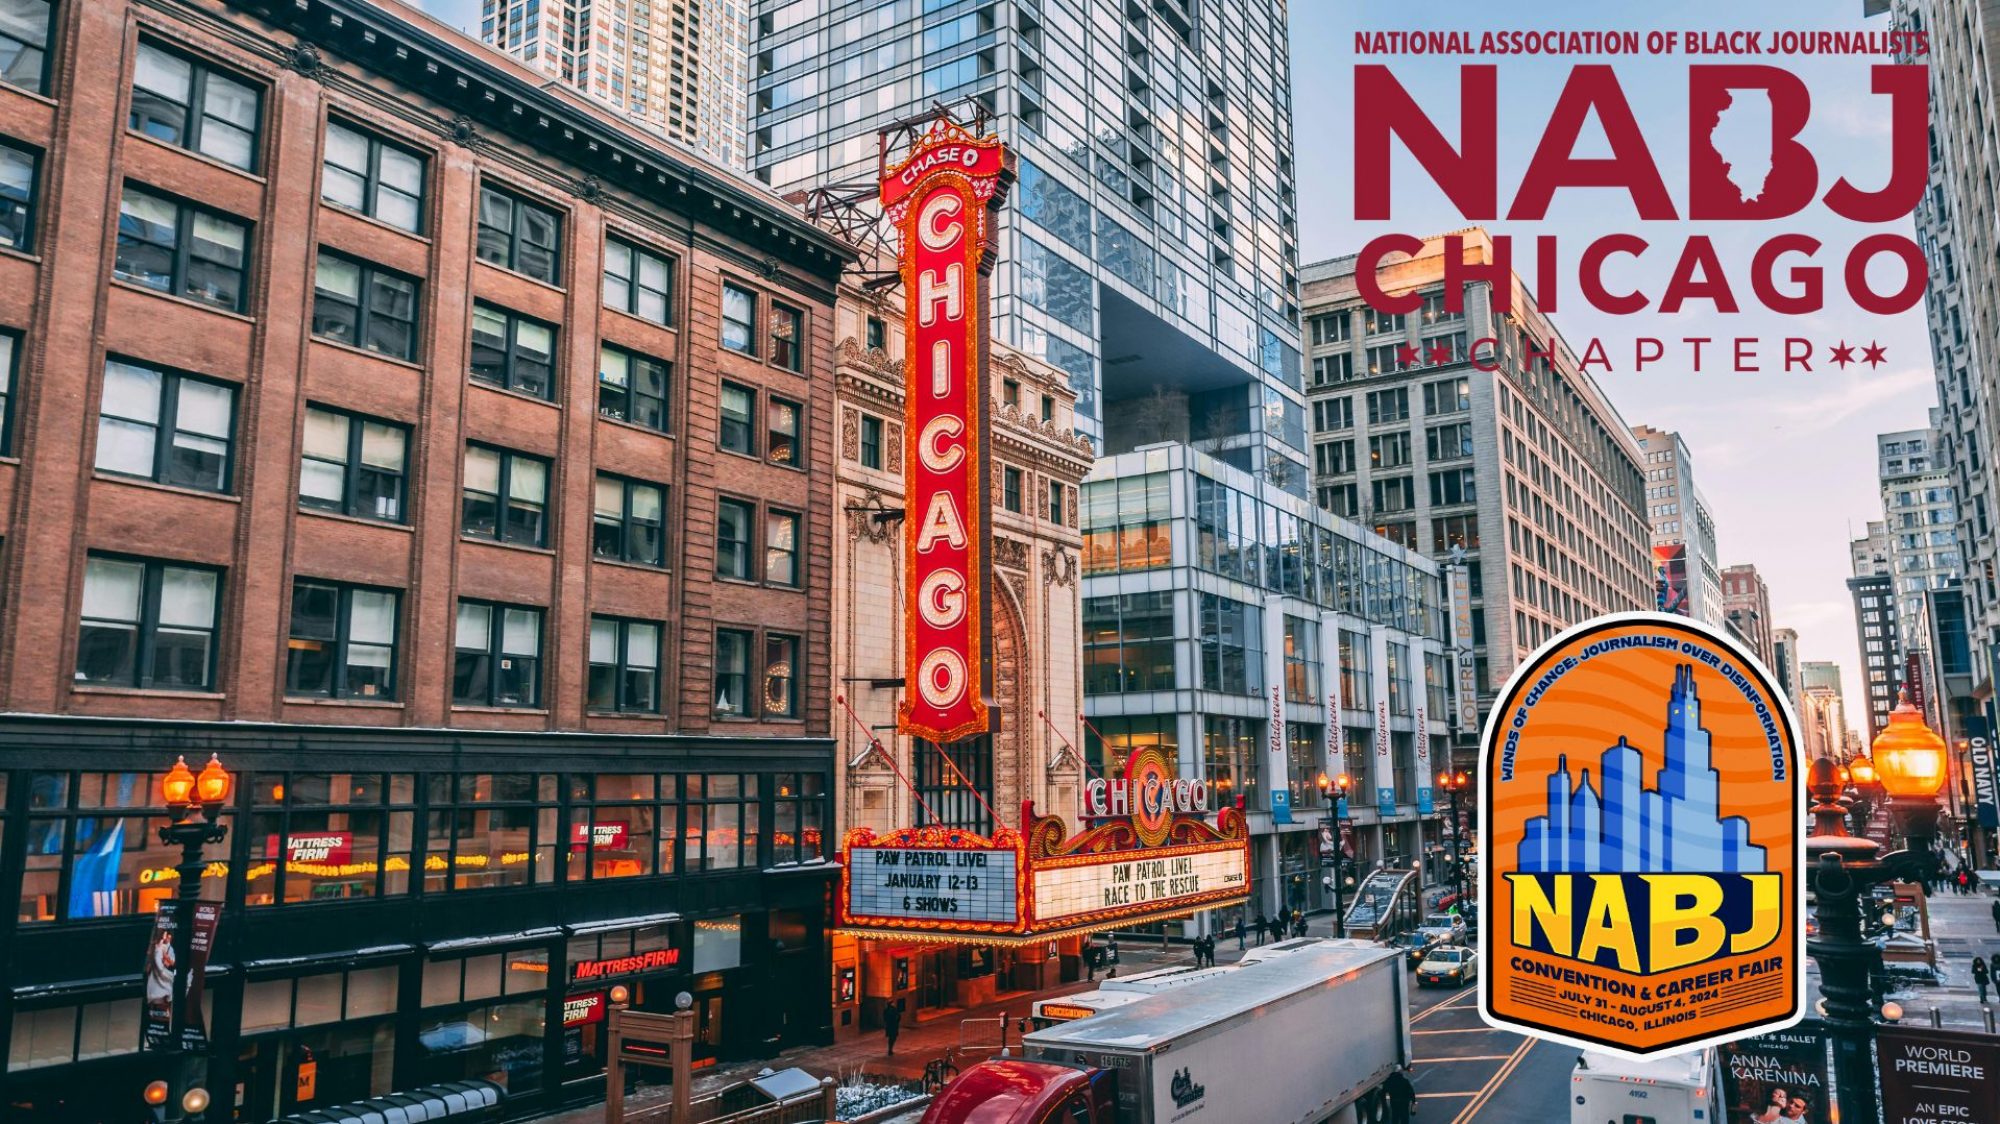 NABJ Chicago you to the Windy City! National Association of